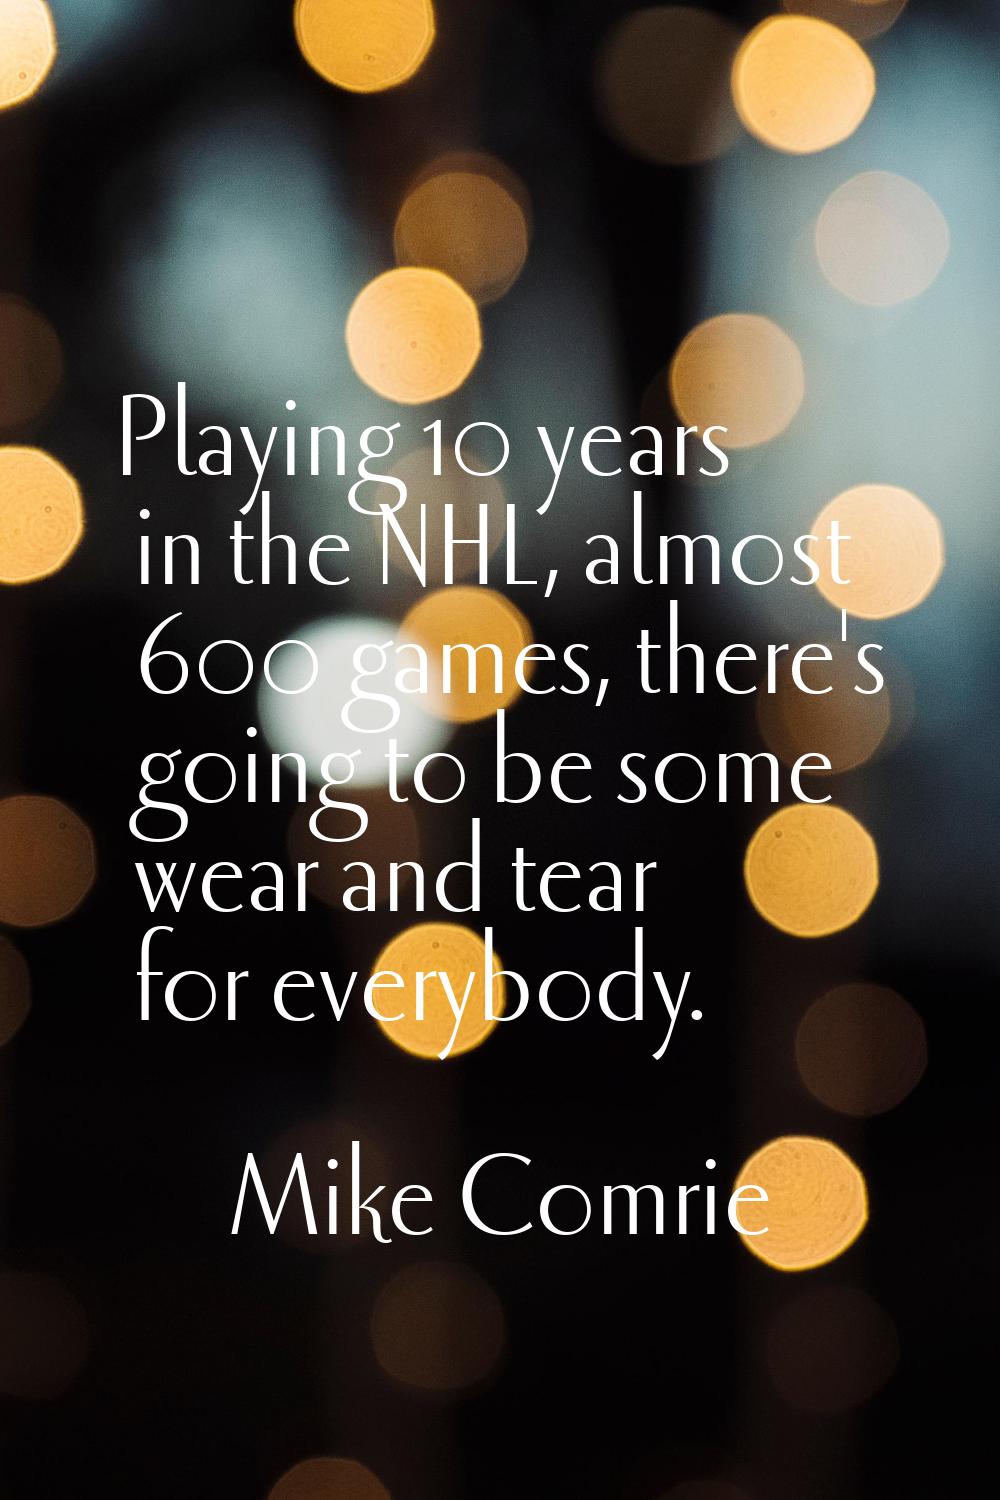 Playing 10 years in the NHL, almost 600 games, there's going to be some wear and tear for everybody